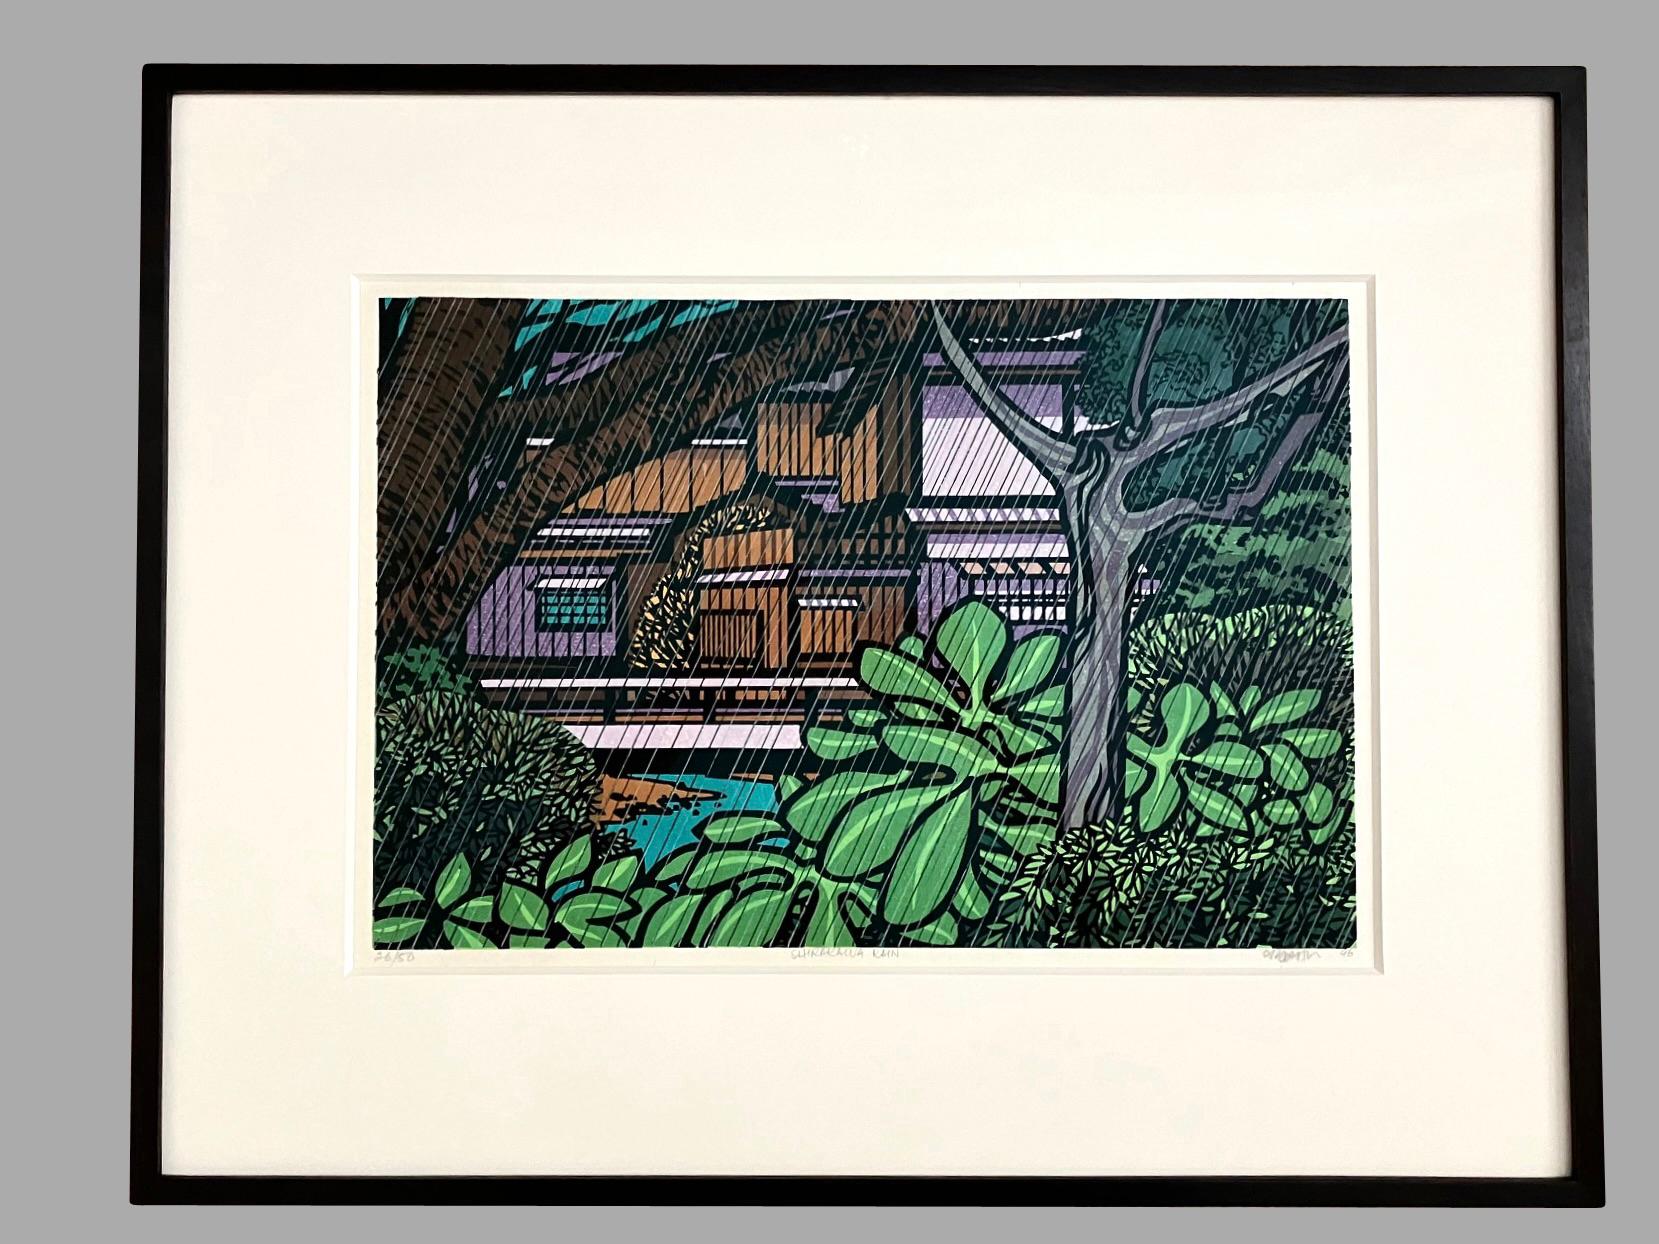 A fine modern Japanese style woodblock print by the American artist Clifton Karhu (American 1927-2007). This piece is titled 